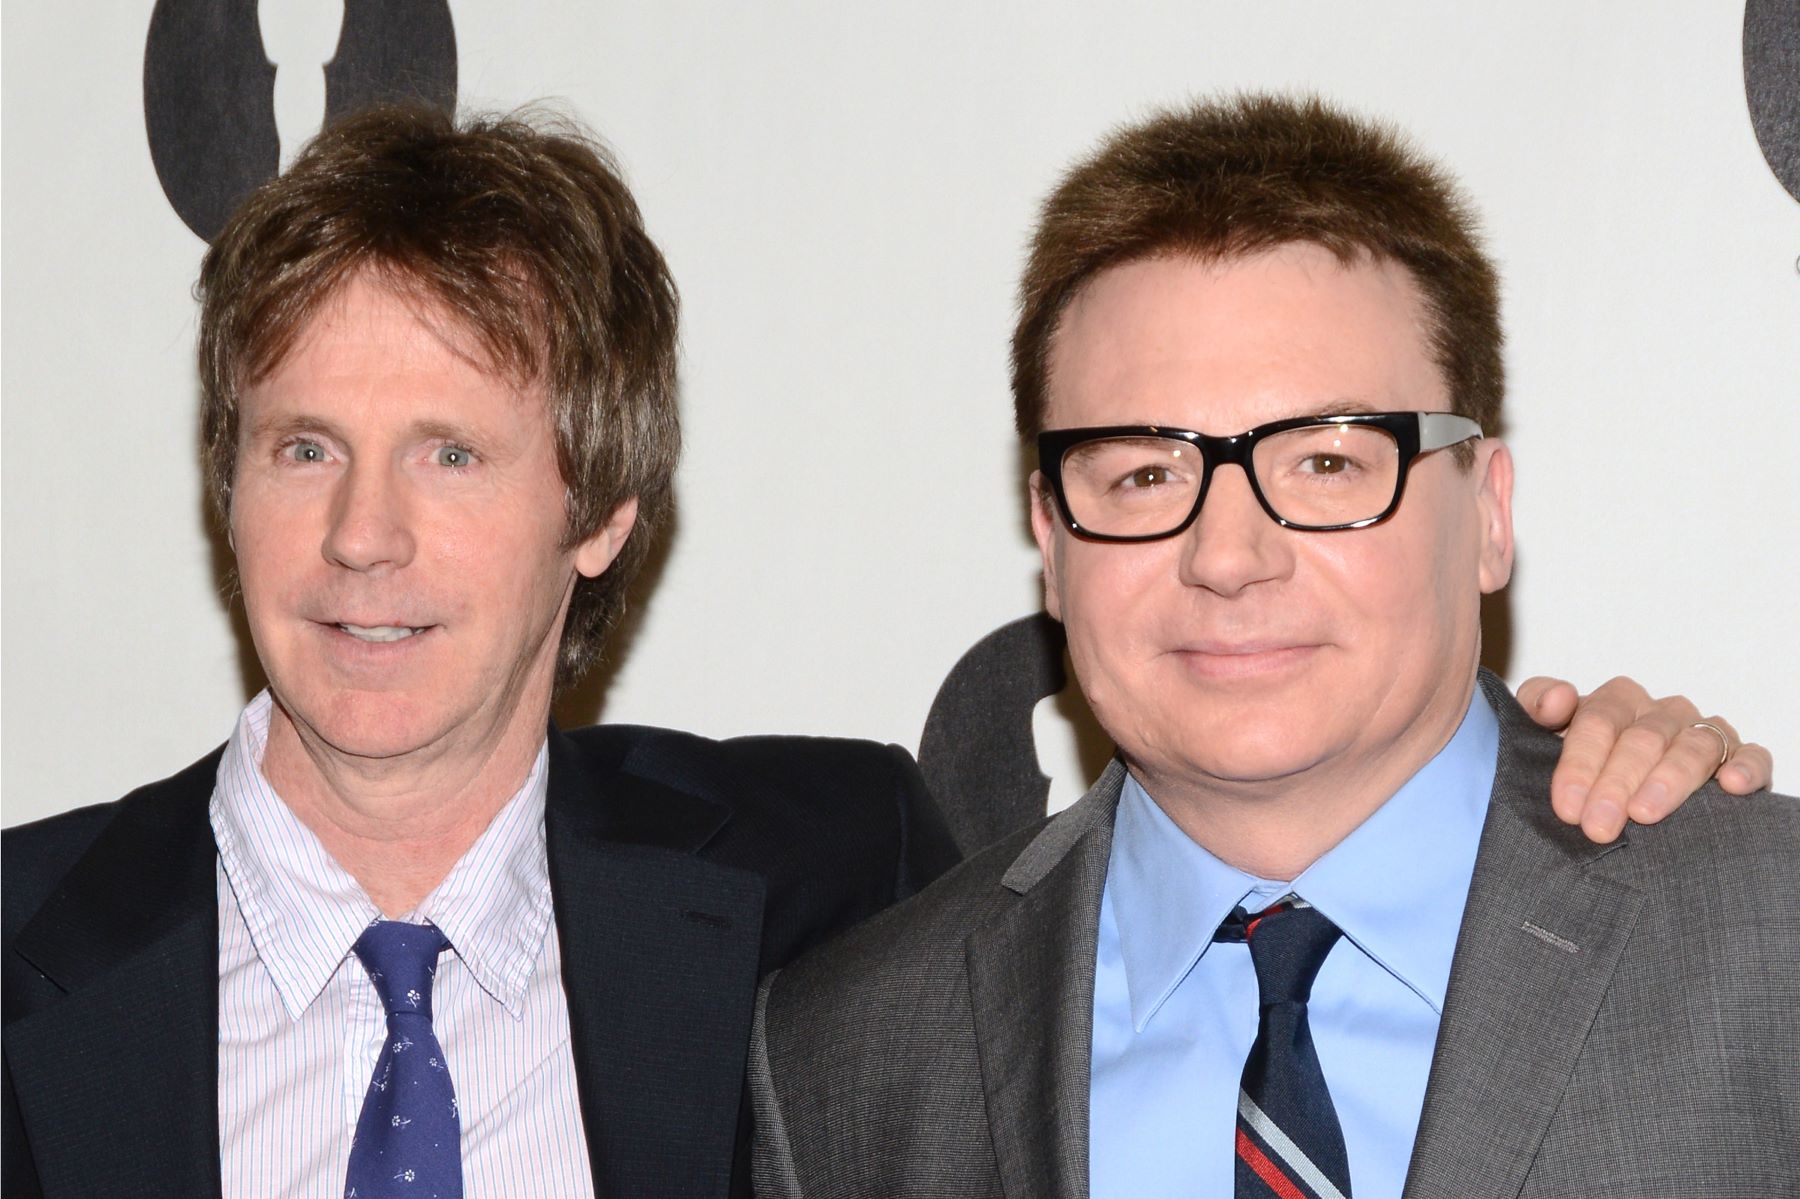 Dana Carvey and Mike Myers at the Academy of Motion Picture Arts and Sciences at AMPAS Samuel Goldwyn Theater